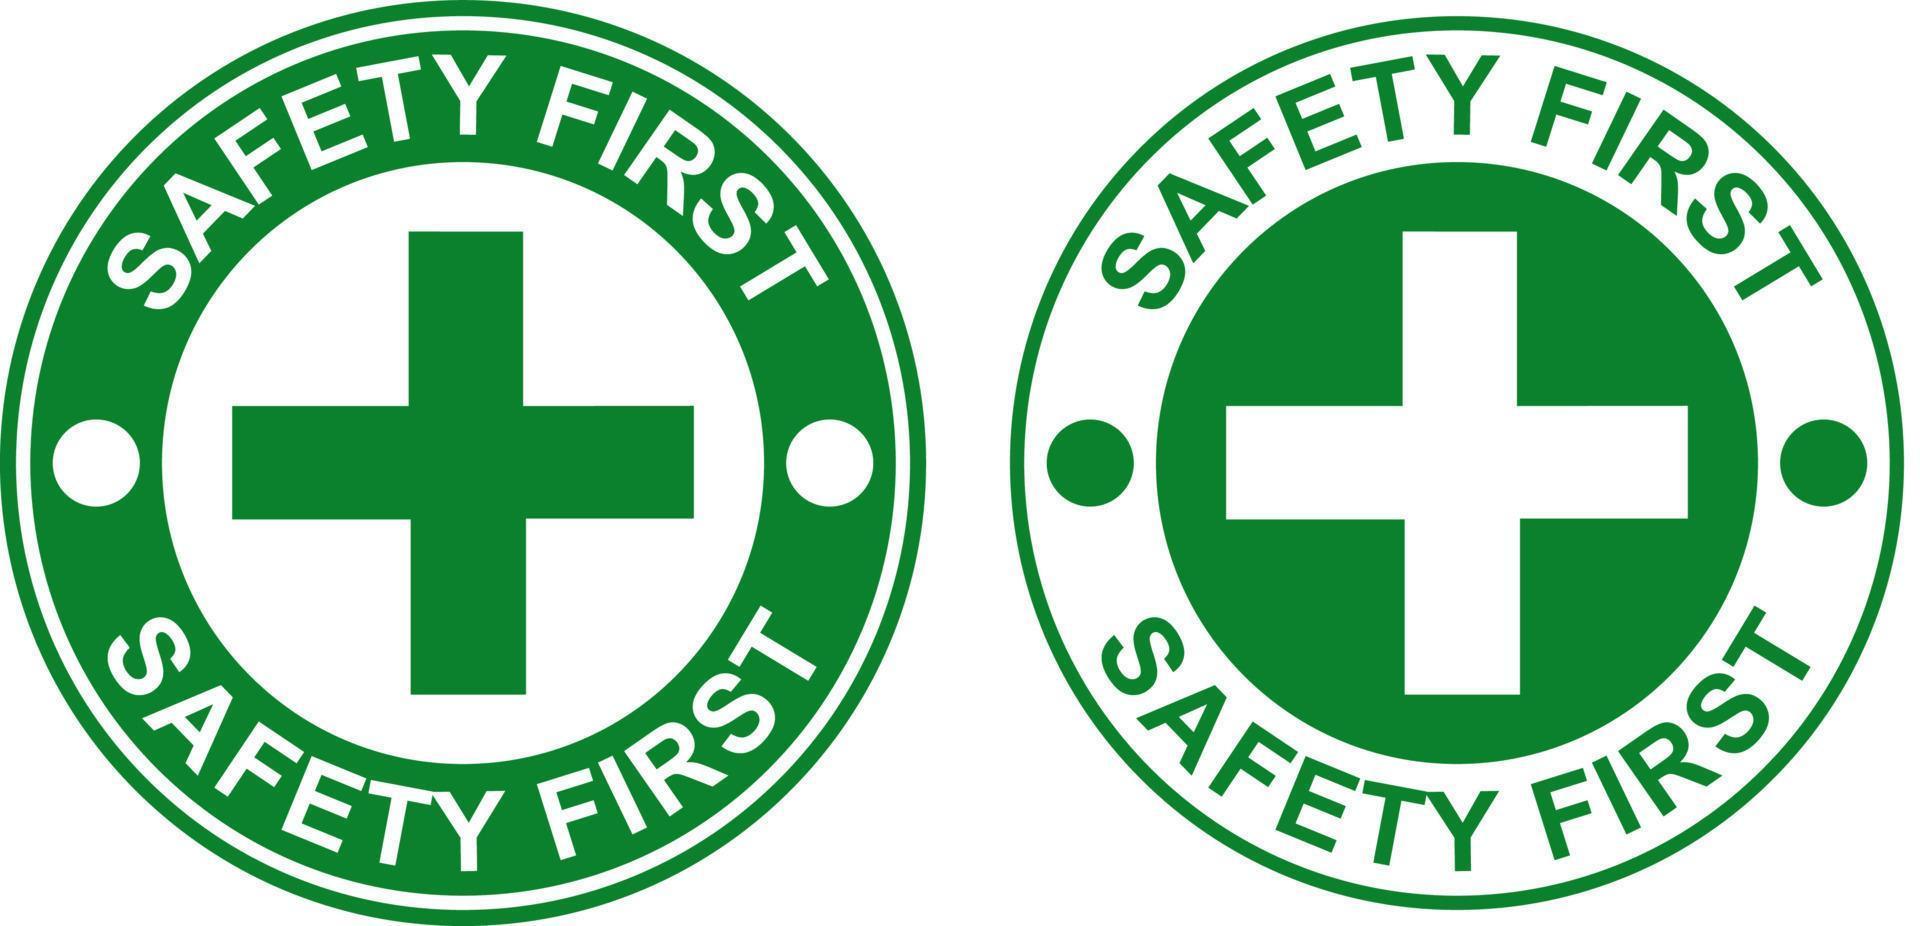 safety first signage logo design printable sign for safely at workplace factory construction banner vector